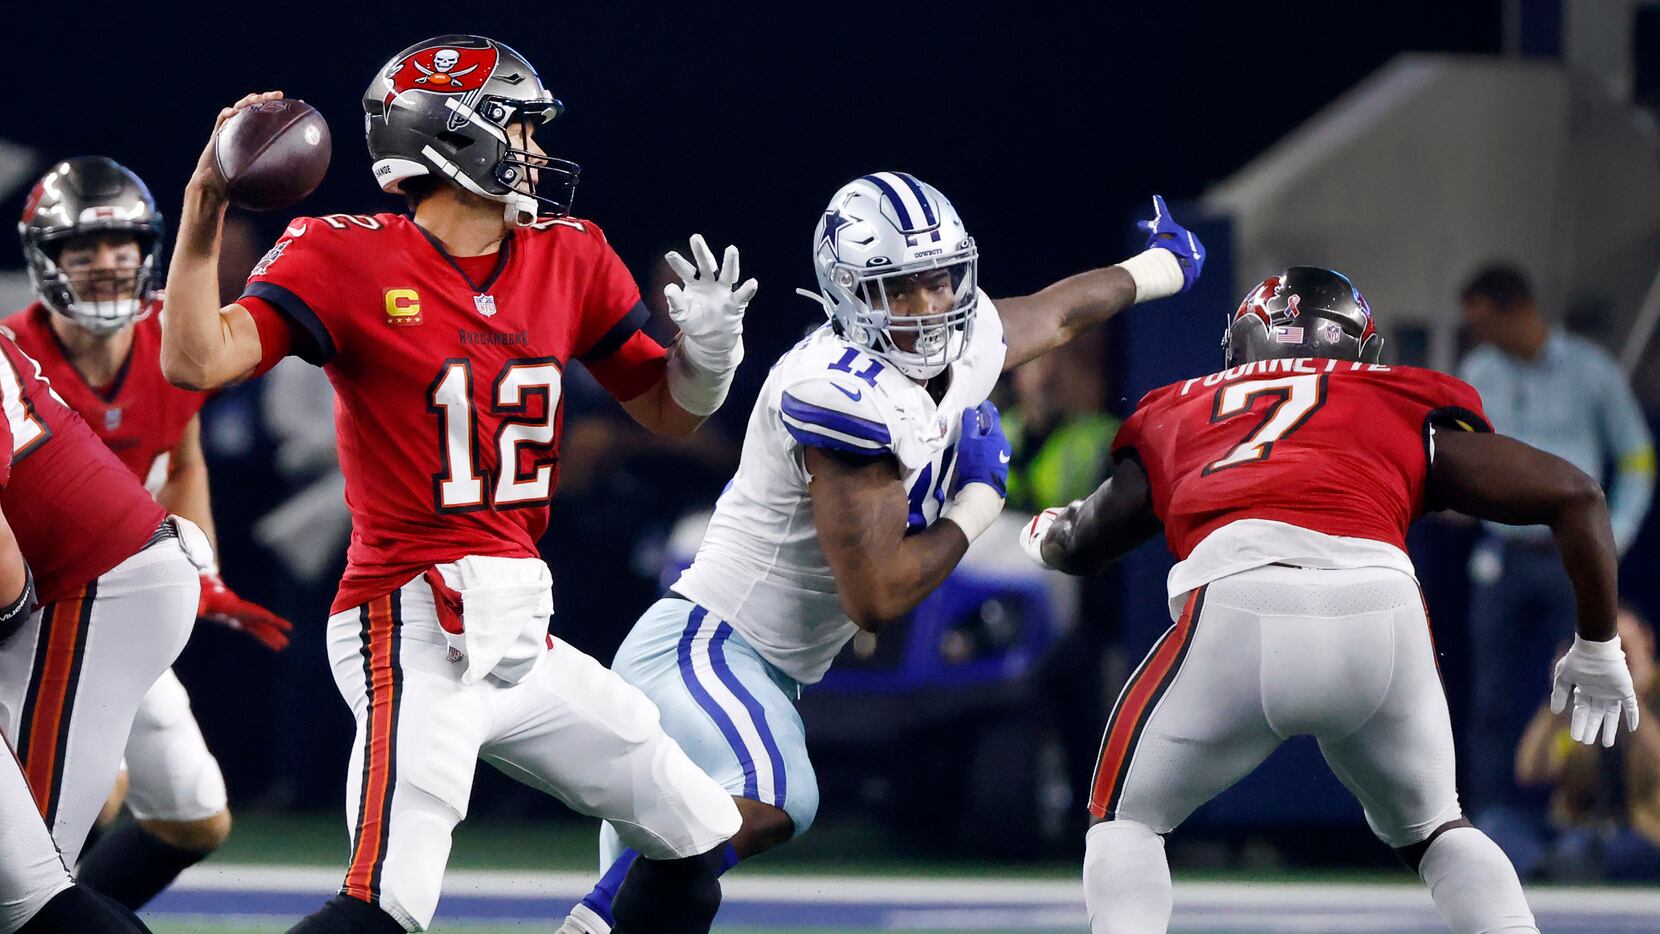 Cowboys likely to meet Tom Brady, Bucs to begin playoffs, but NFC East  title still in play